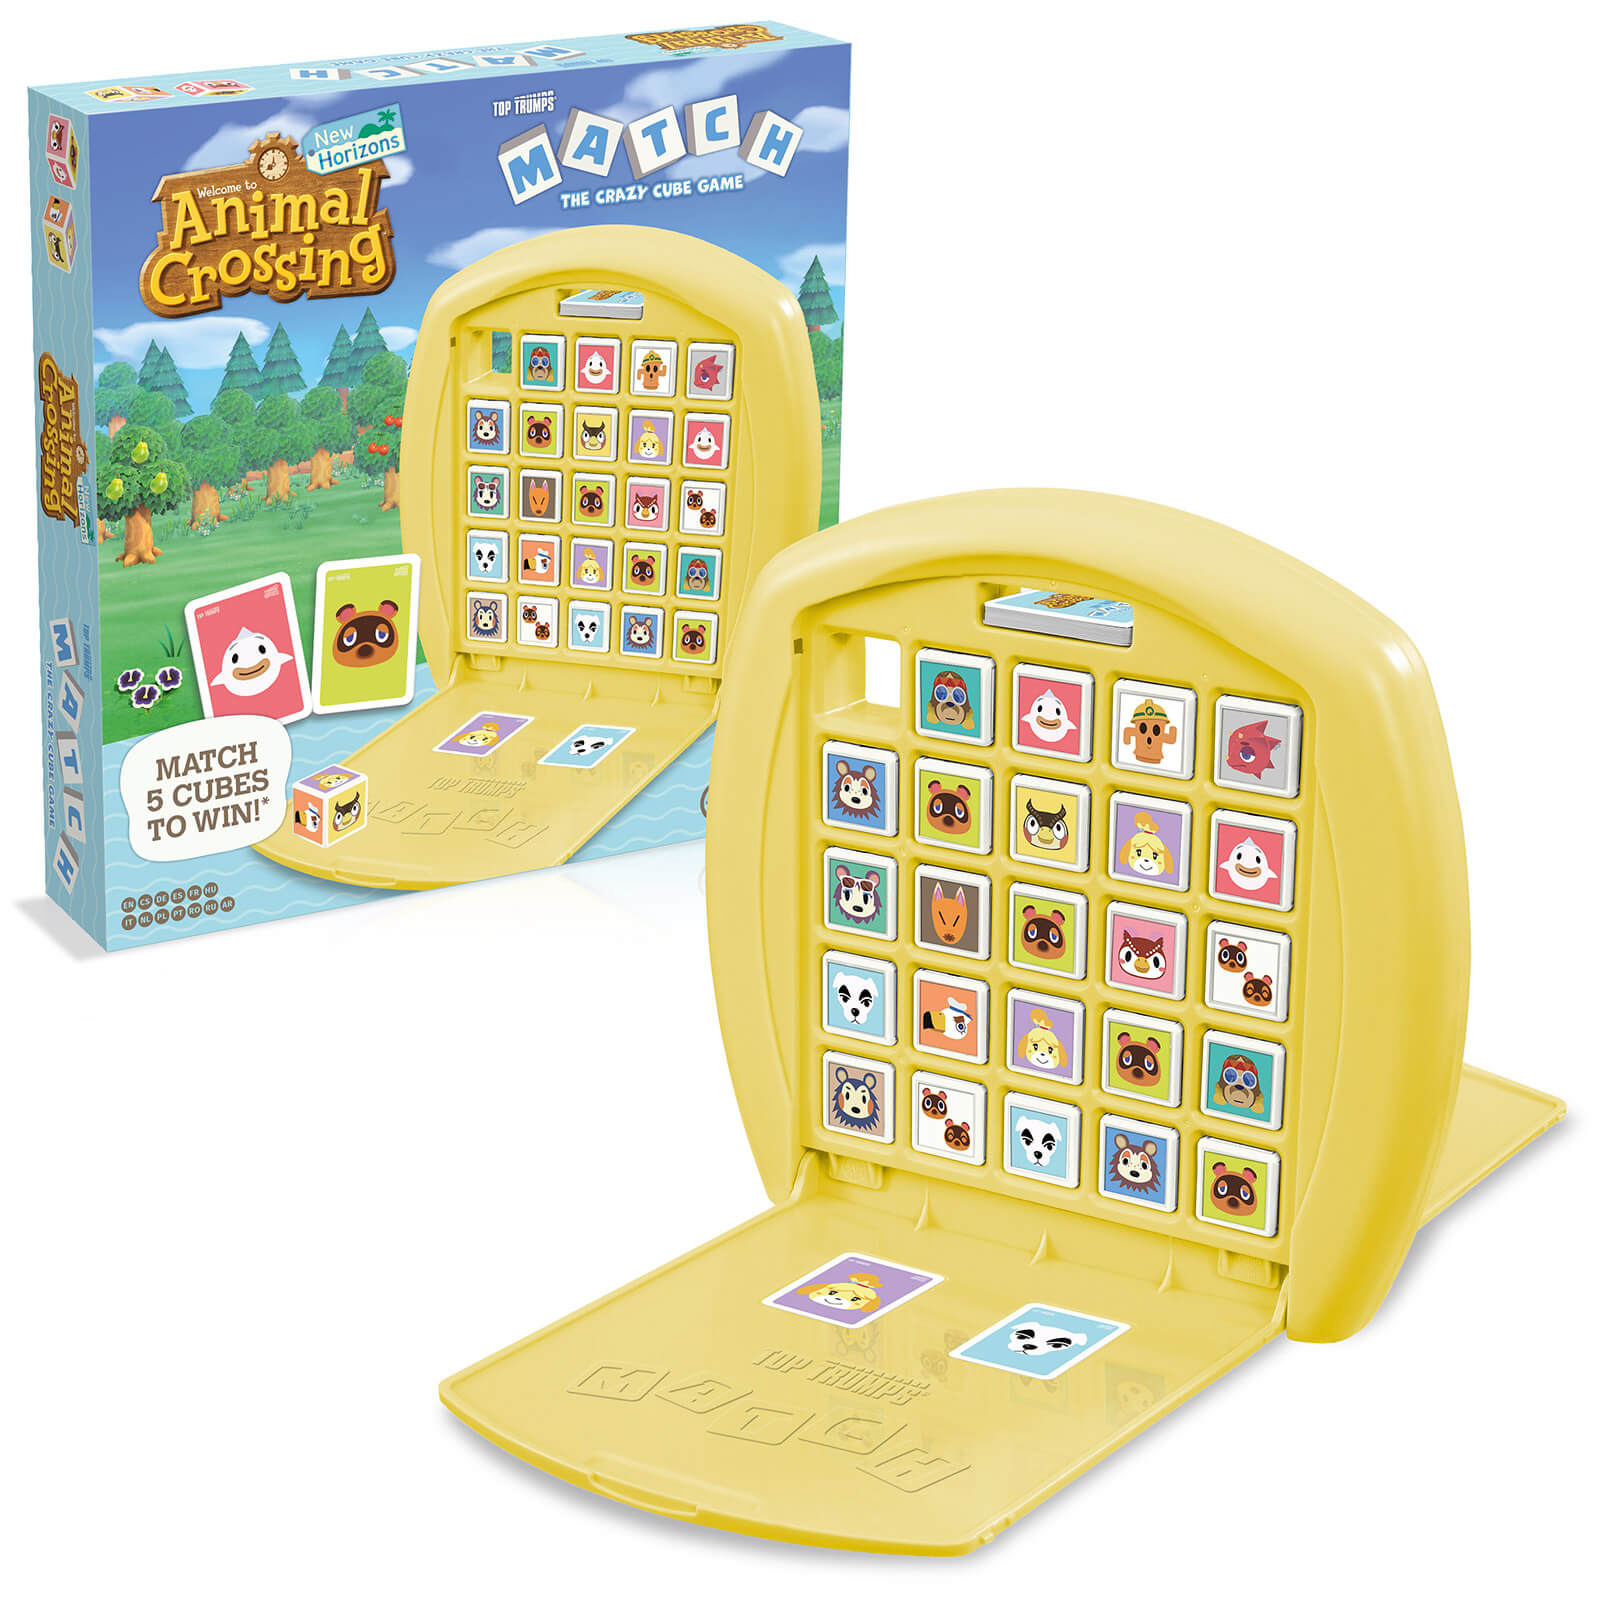 Top Trumps Match Board Game - Animal Crossing Edition